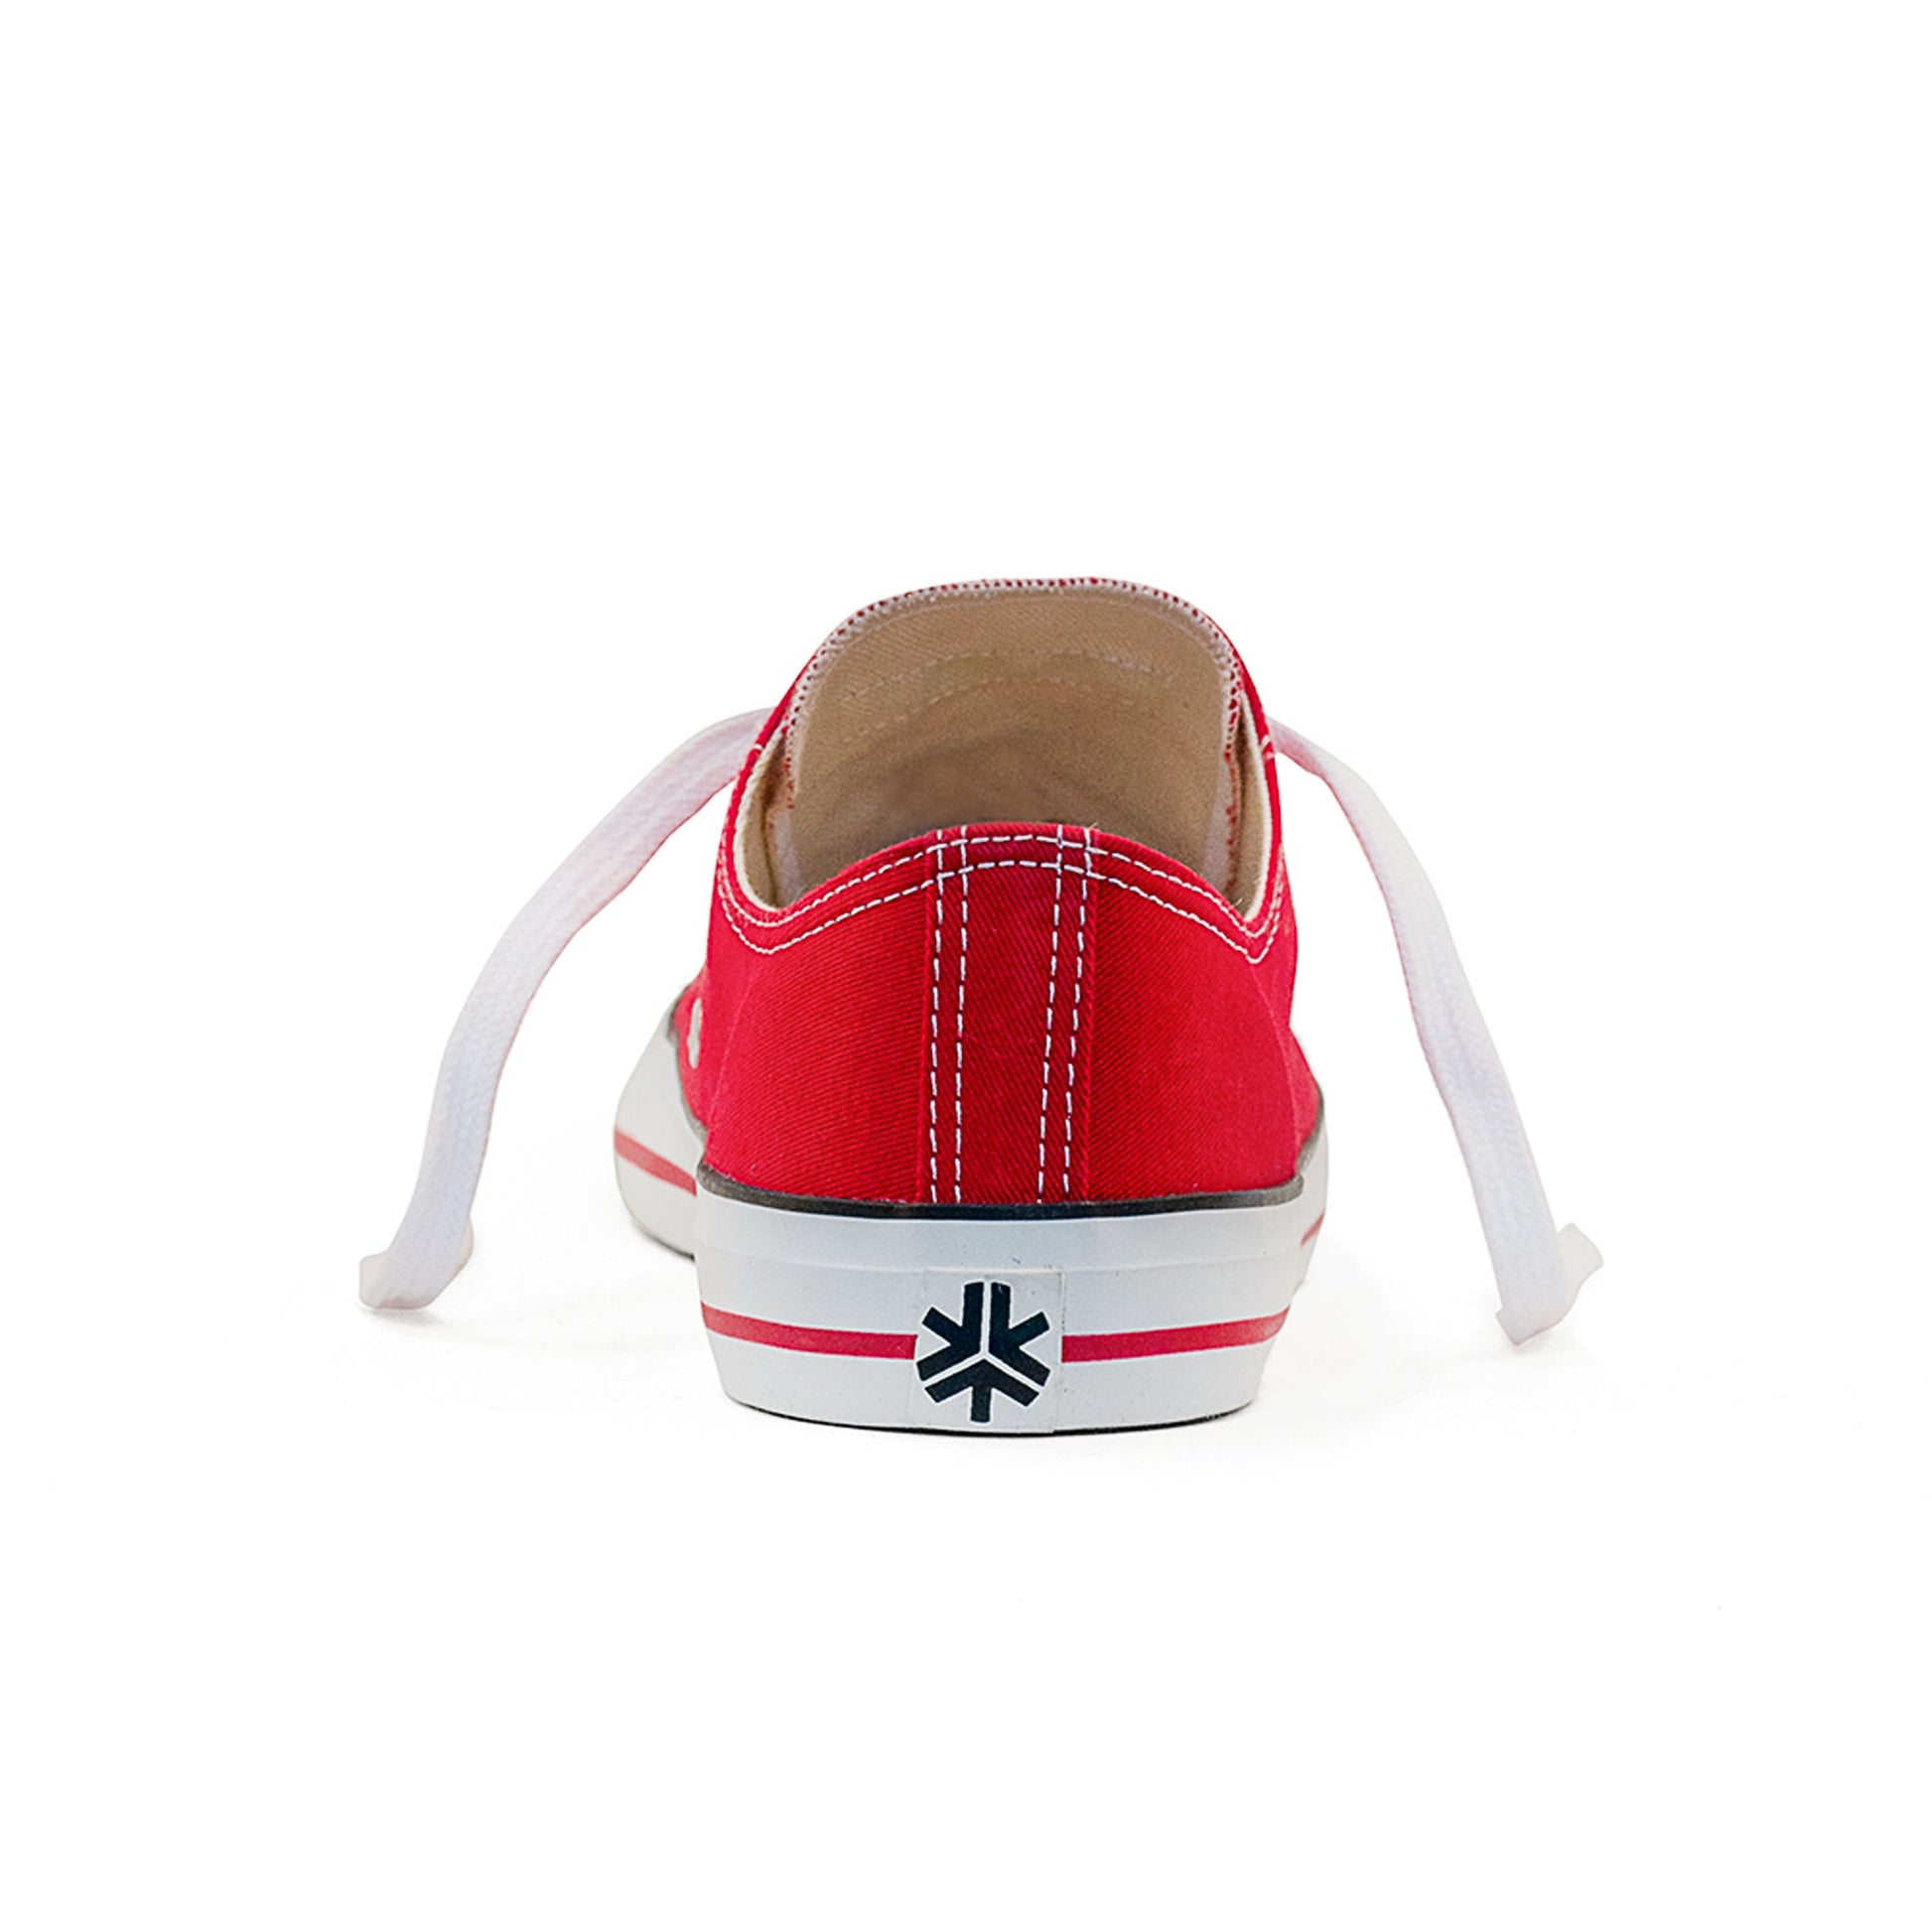 Etiko Fairtrade Certified low cut style red and white vegan, eco-friendly sneakers